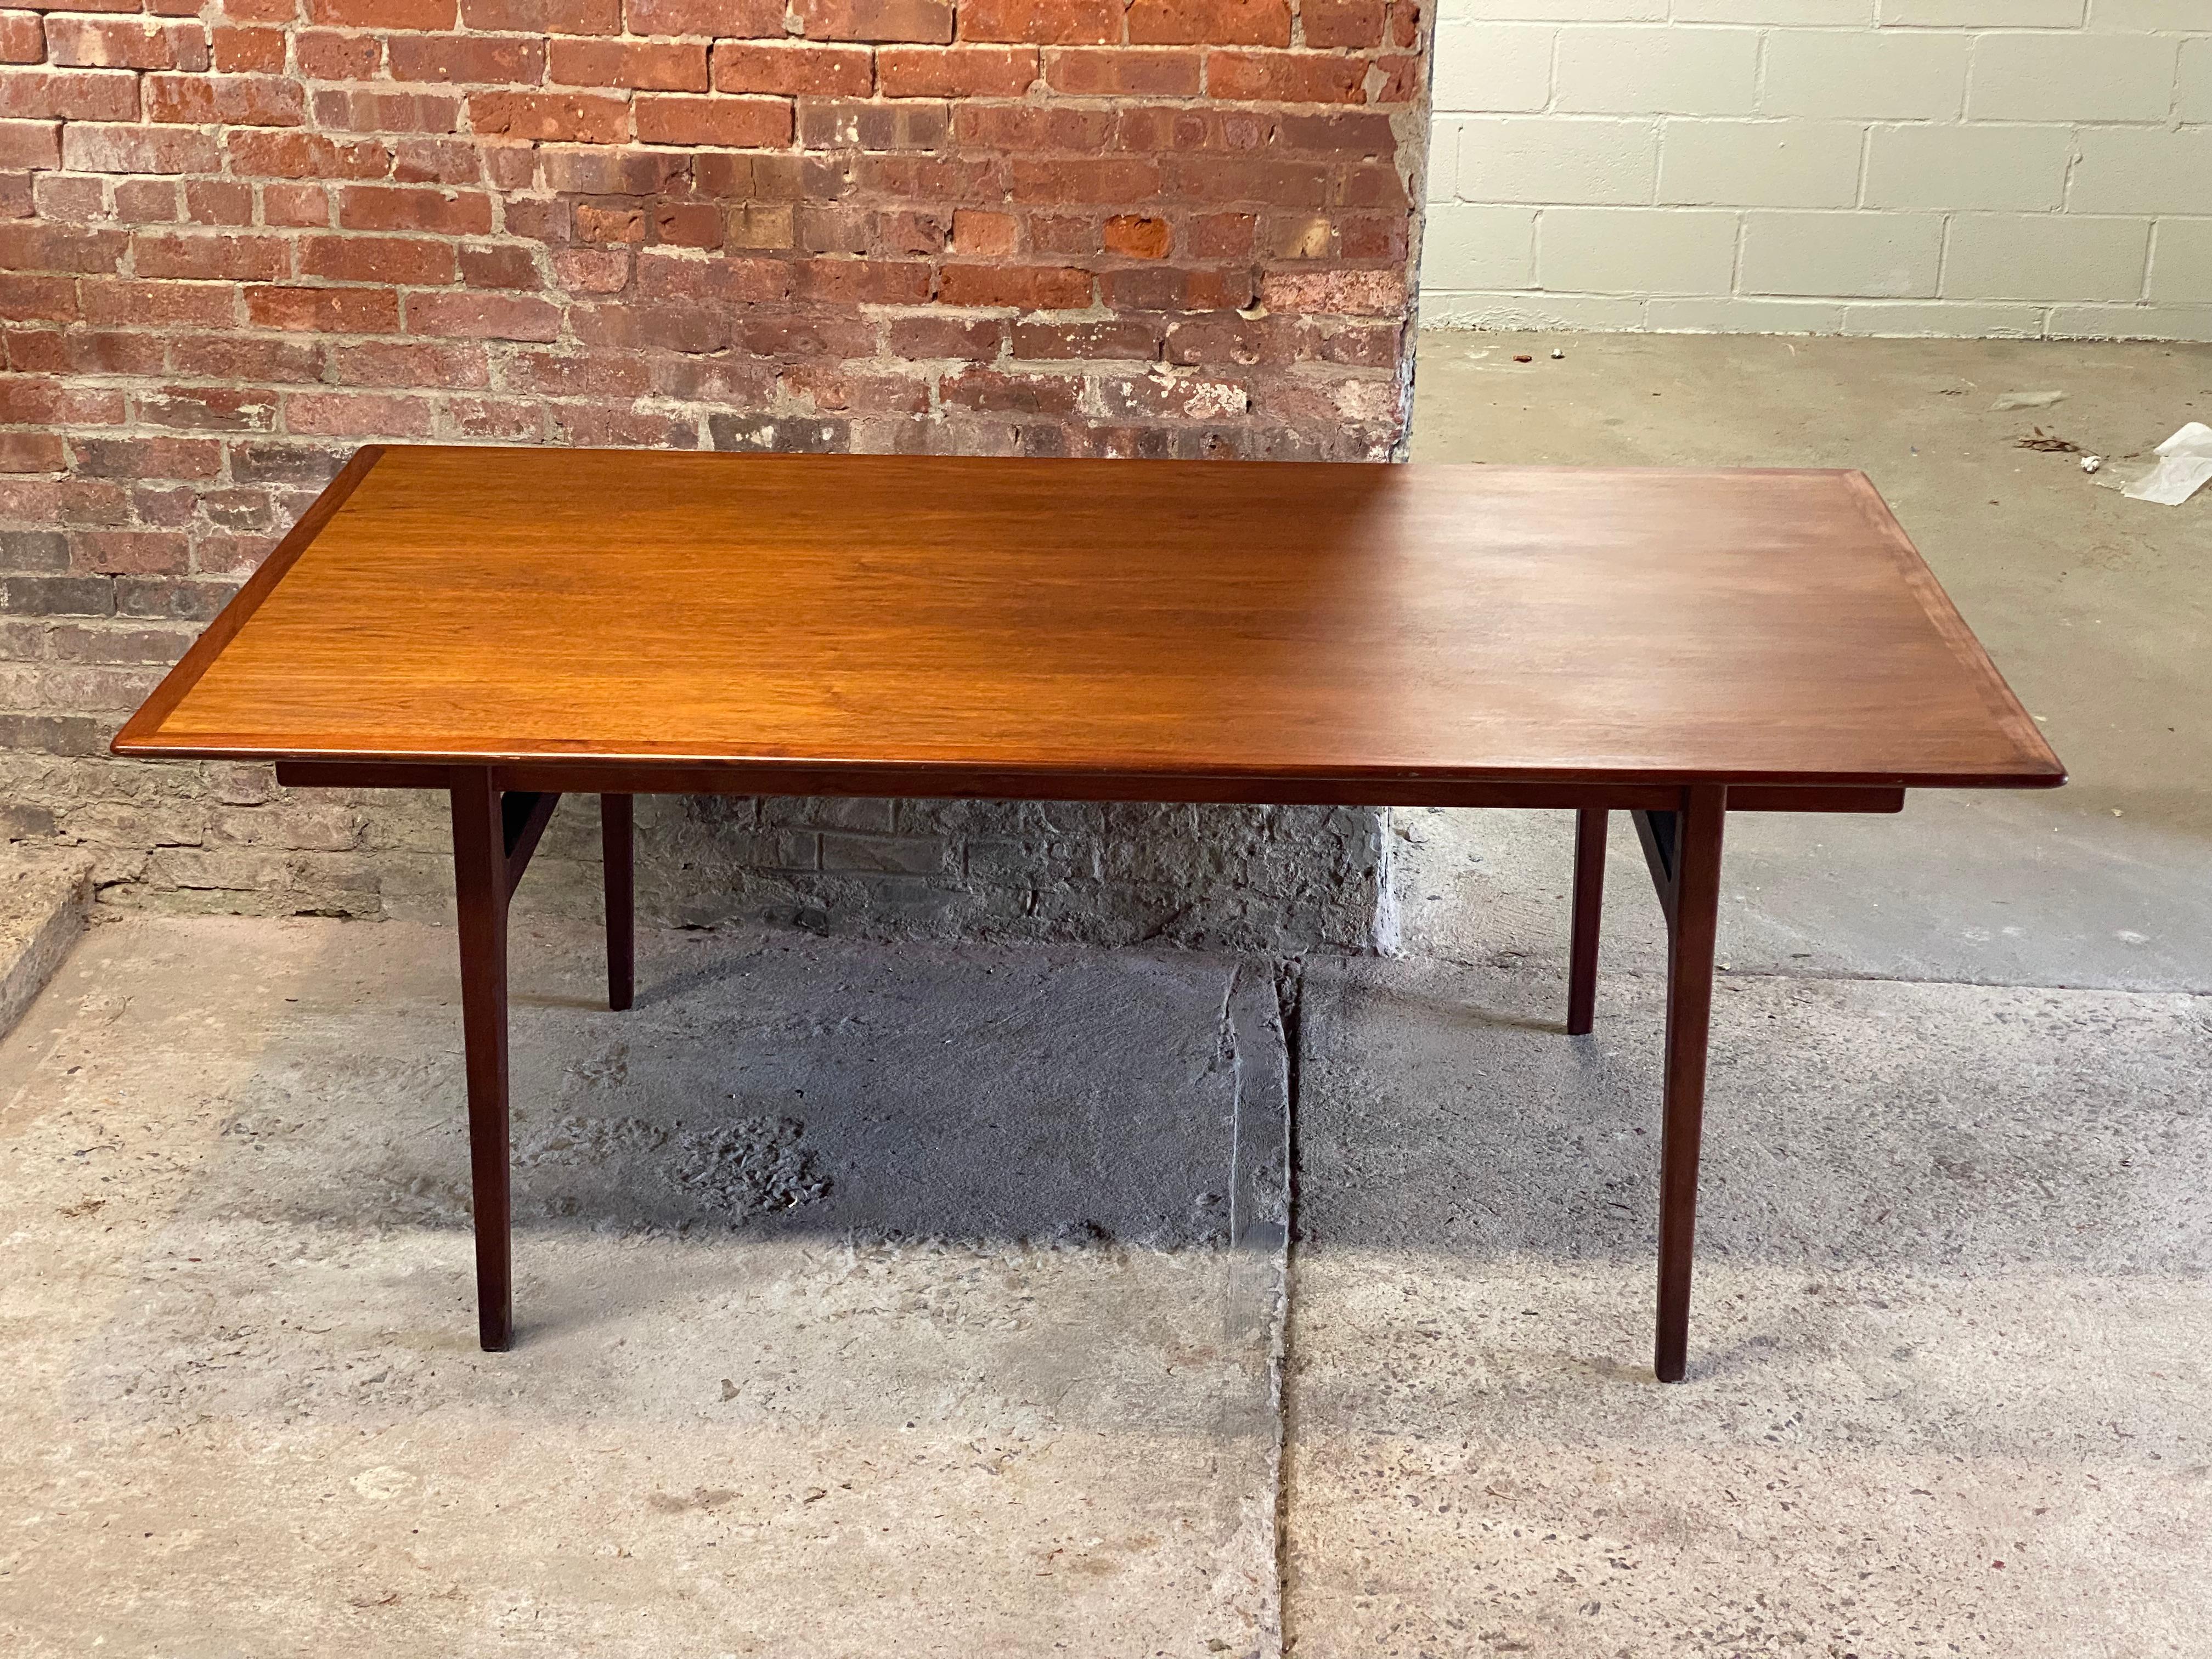 Large, distinct and rare Mid Century Modern Walnut dining table with two leaves designed by Al Huller Furniture Company, Inc. New York, New York for Furnwood Corporation, Brockton, MA. Circa 1965. Signed with metal tag un the underside of the table.